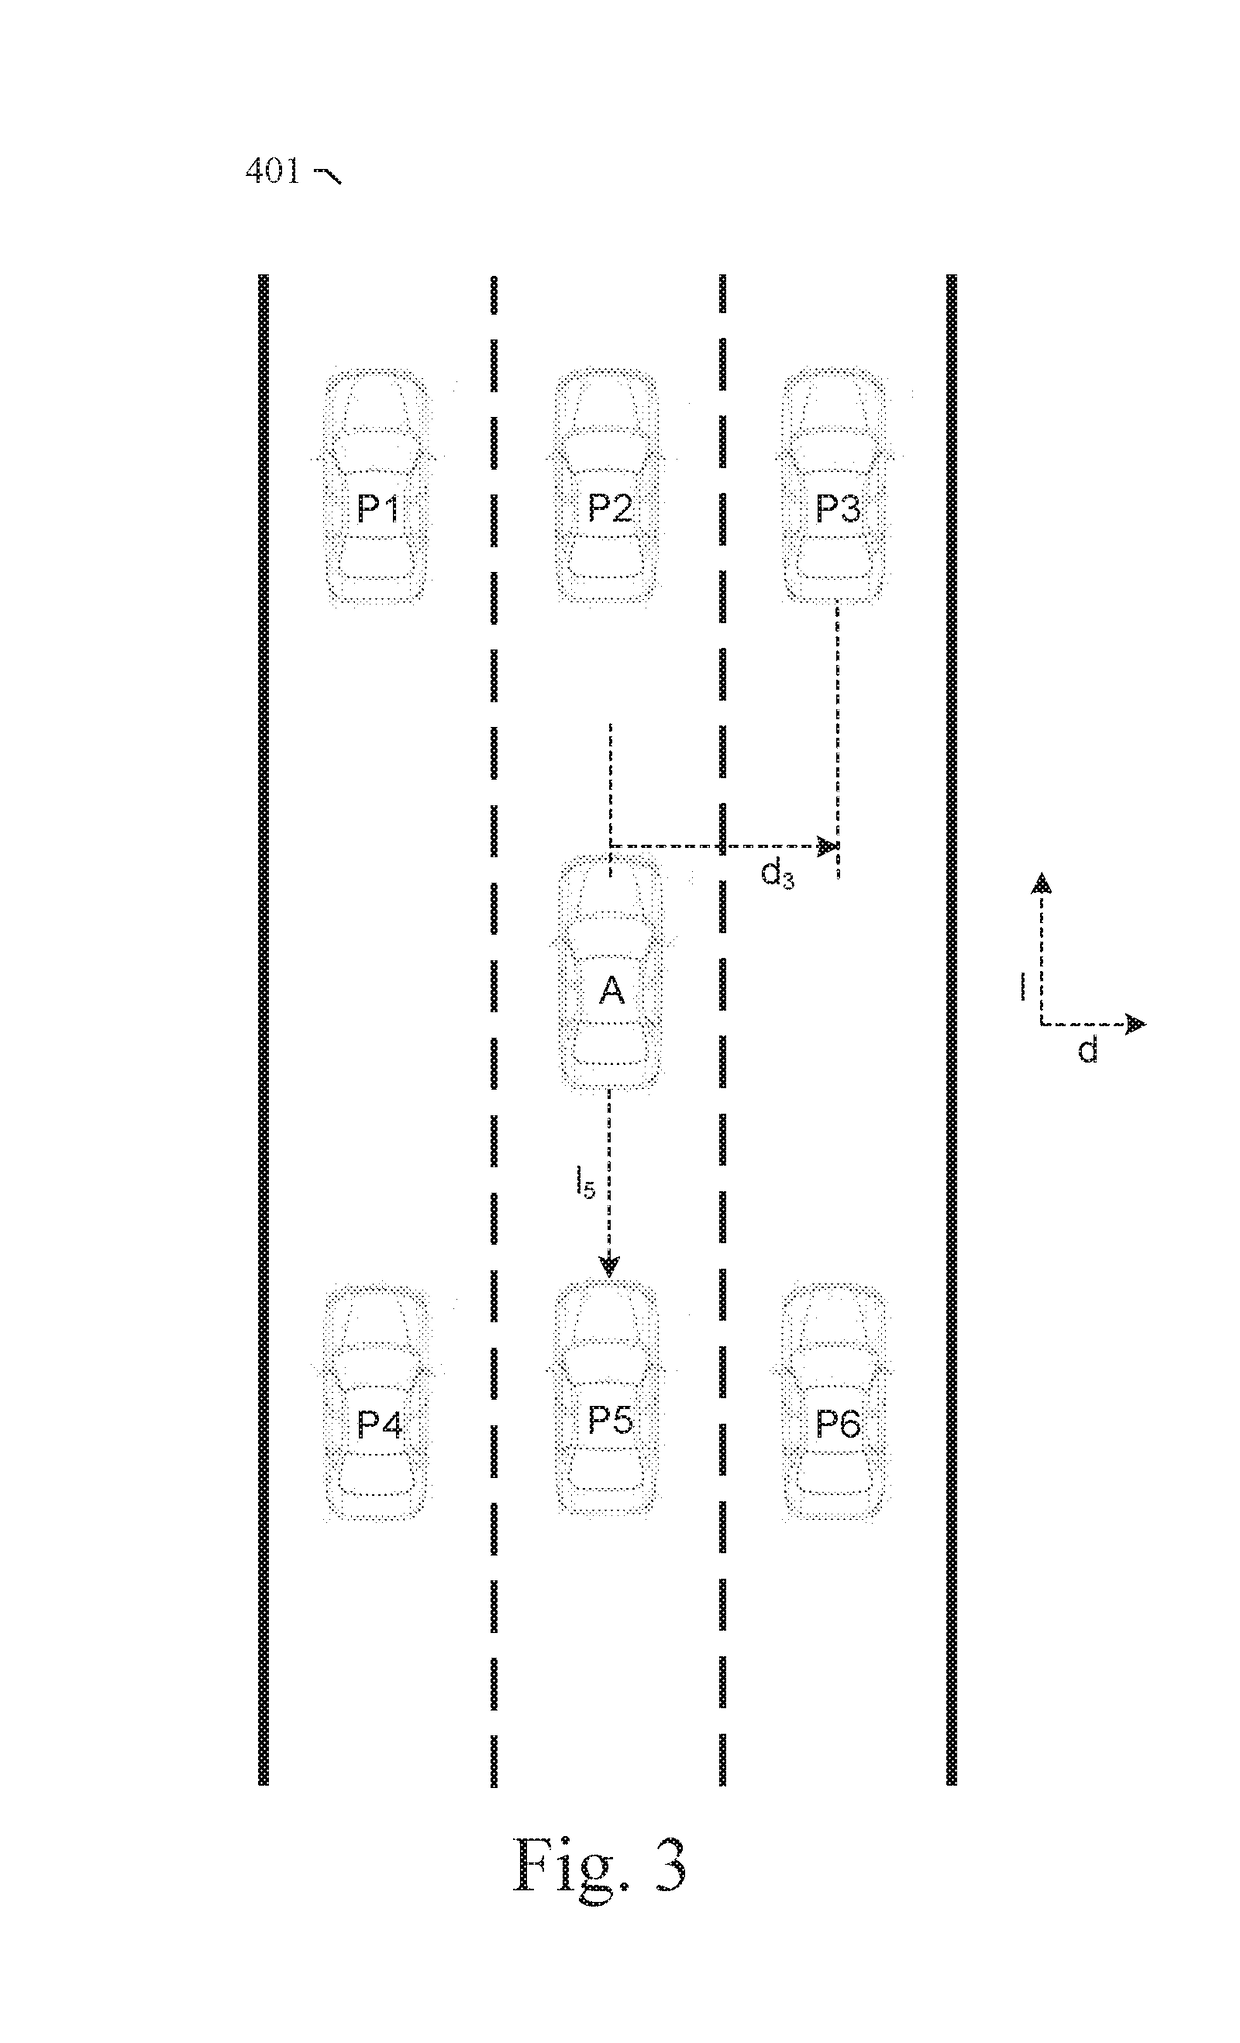 Prediction-based system and method for trajectory planning of autonomous vehicles